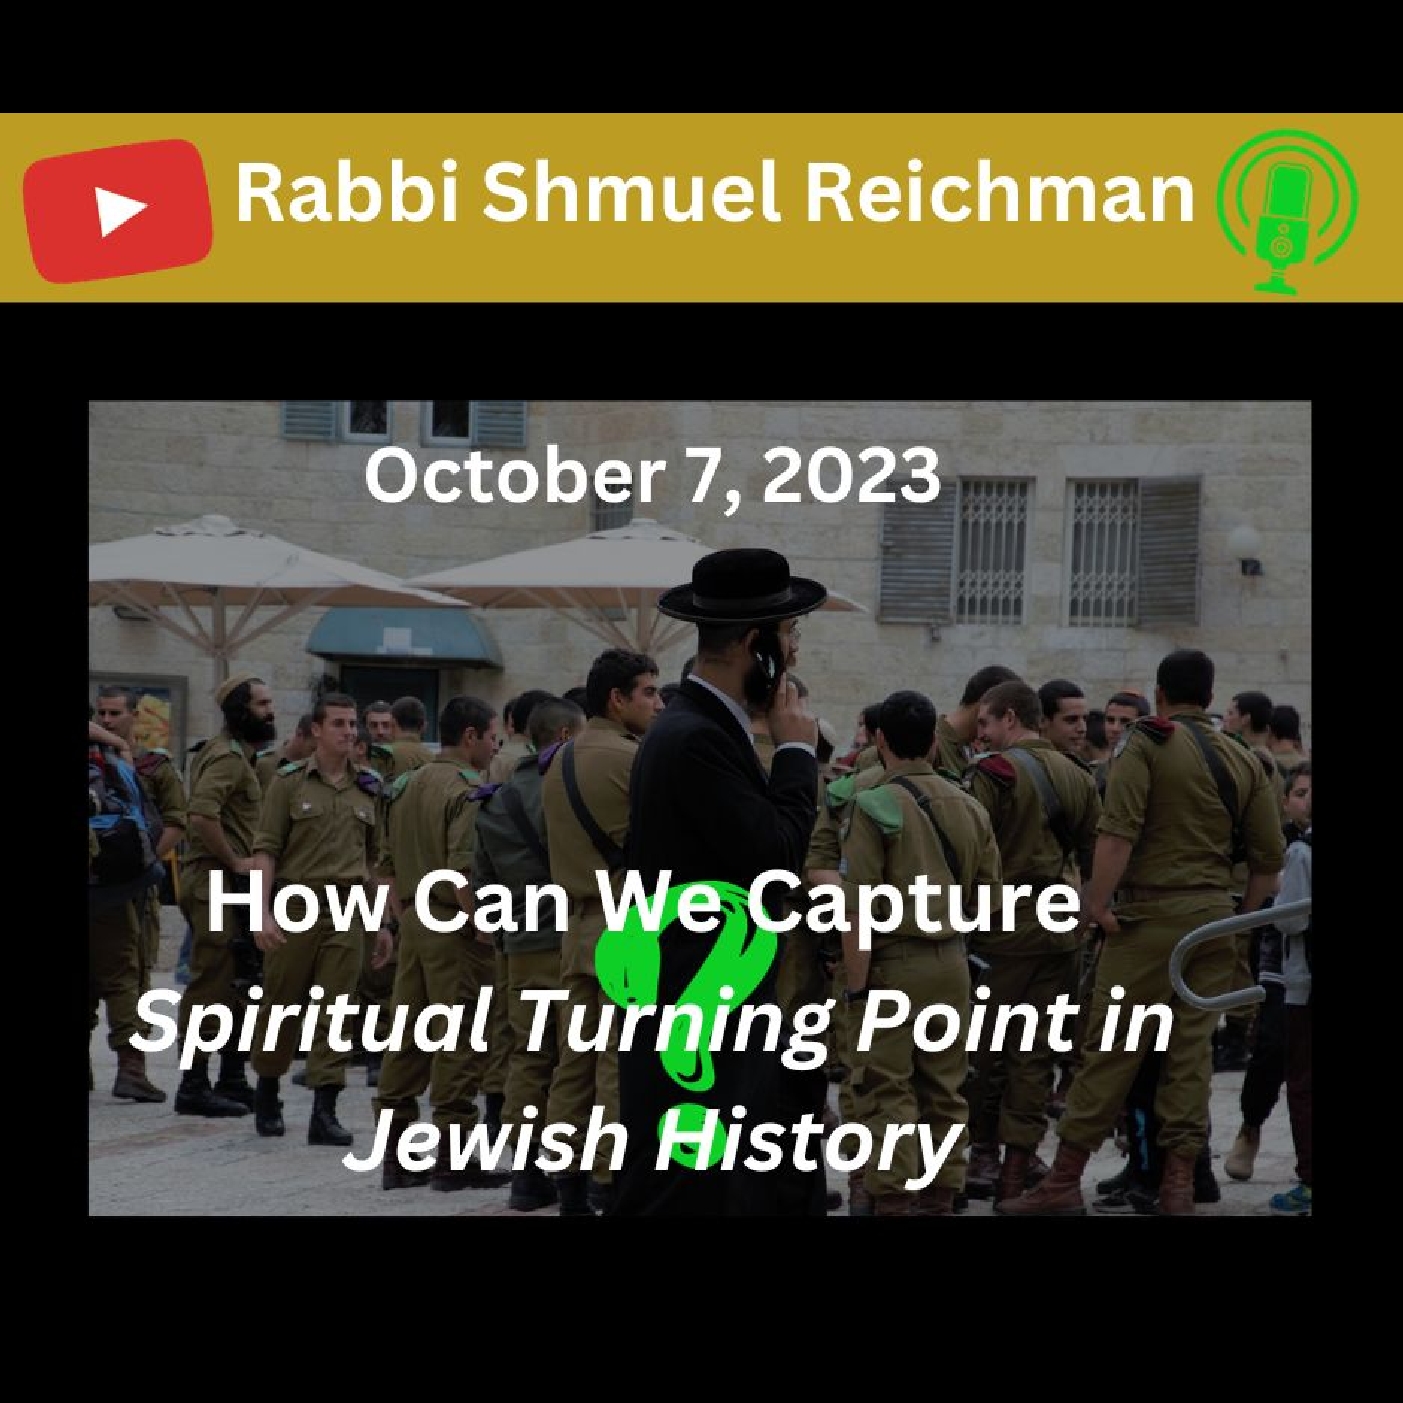 October 7, 2023 - How Can We Capture - Spiritual Turning Point in Jewish History - Rabbi Shmuel Reichman